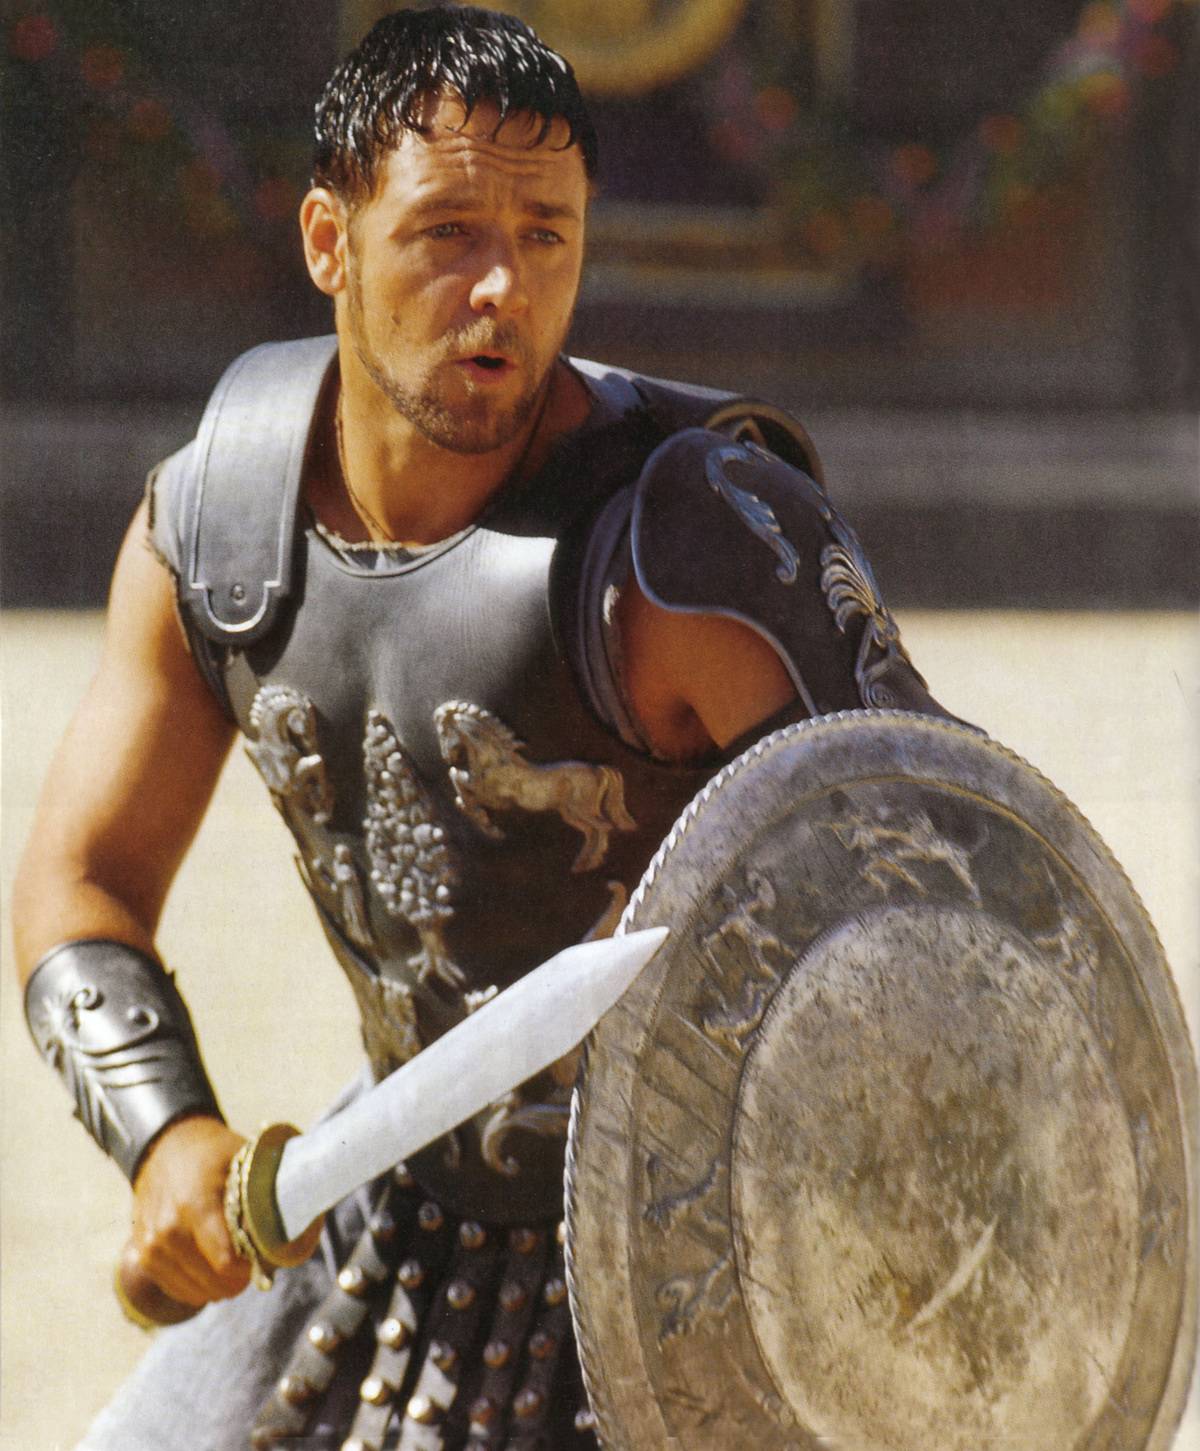 <p>Look no further than the five Oscars the movie <i>Gladiator</i> won to verify its genuine Medieval depiction. </p> <p> It received an Academy Award for Best Picture, Costume Design, Sound, and Visual Effects. Russell Crowe's portrayal of General Maximus Decimus Meridius earned him the Oscar for Best Actor. The movie is credited with revamping the Medieval genre and influencing future historical pieces. </p>